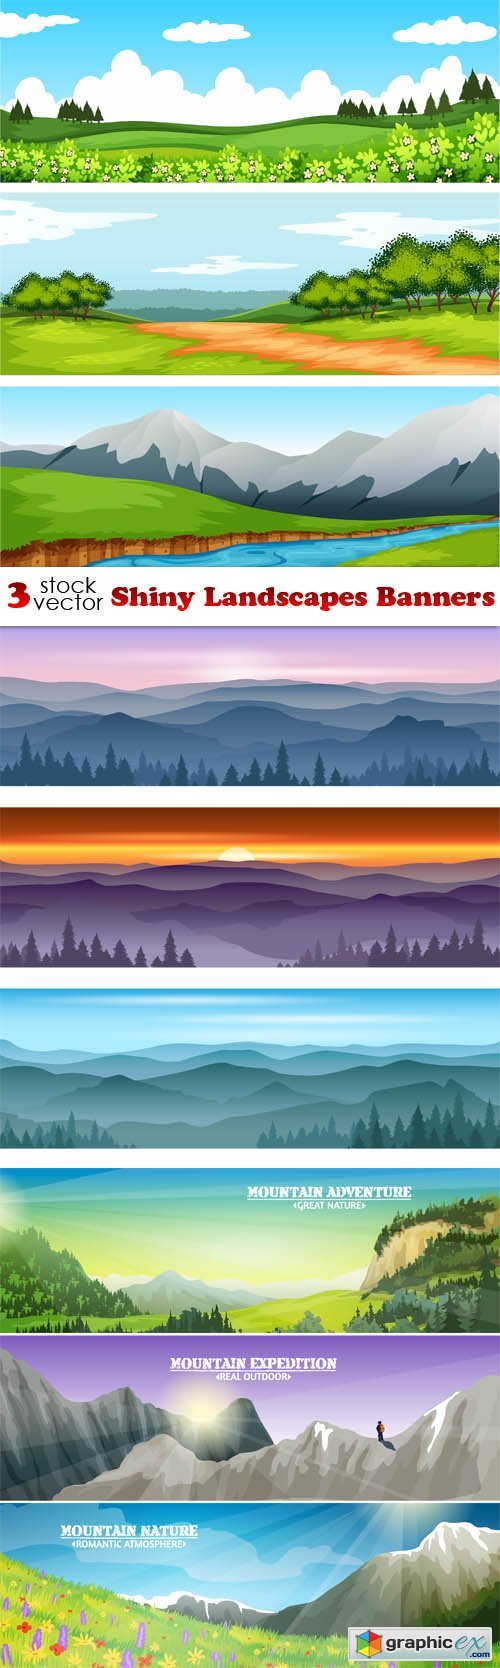 Shiny Landscapes Banners